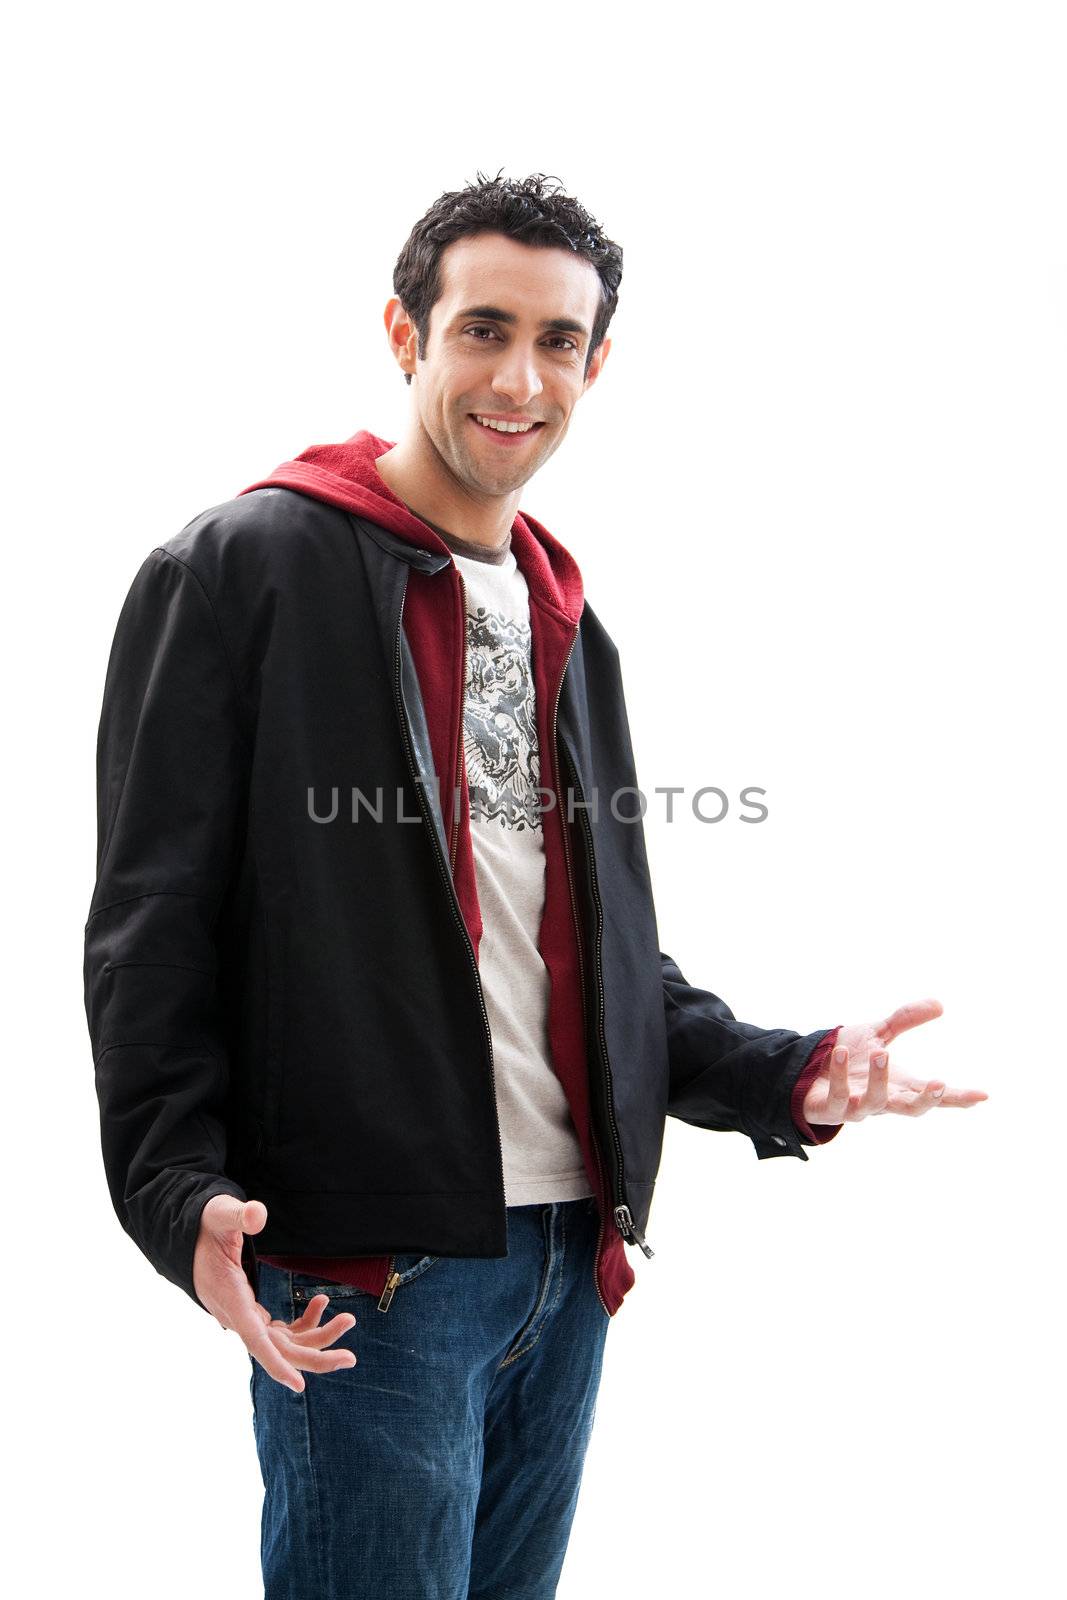 Cool handsome male smiling wearing a red hoodie, black coat and jeans, with hands open, isolated